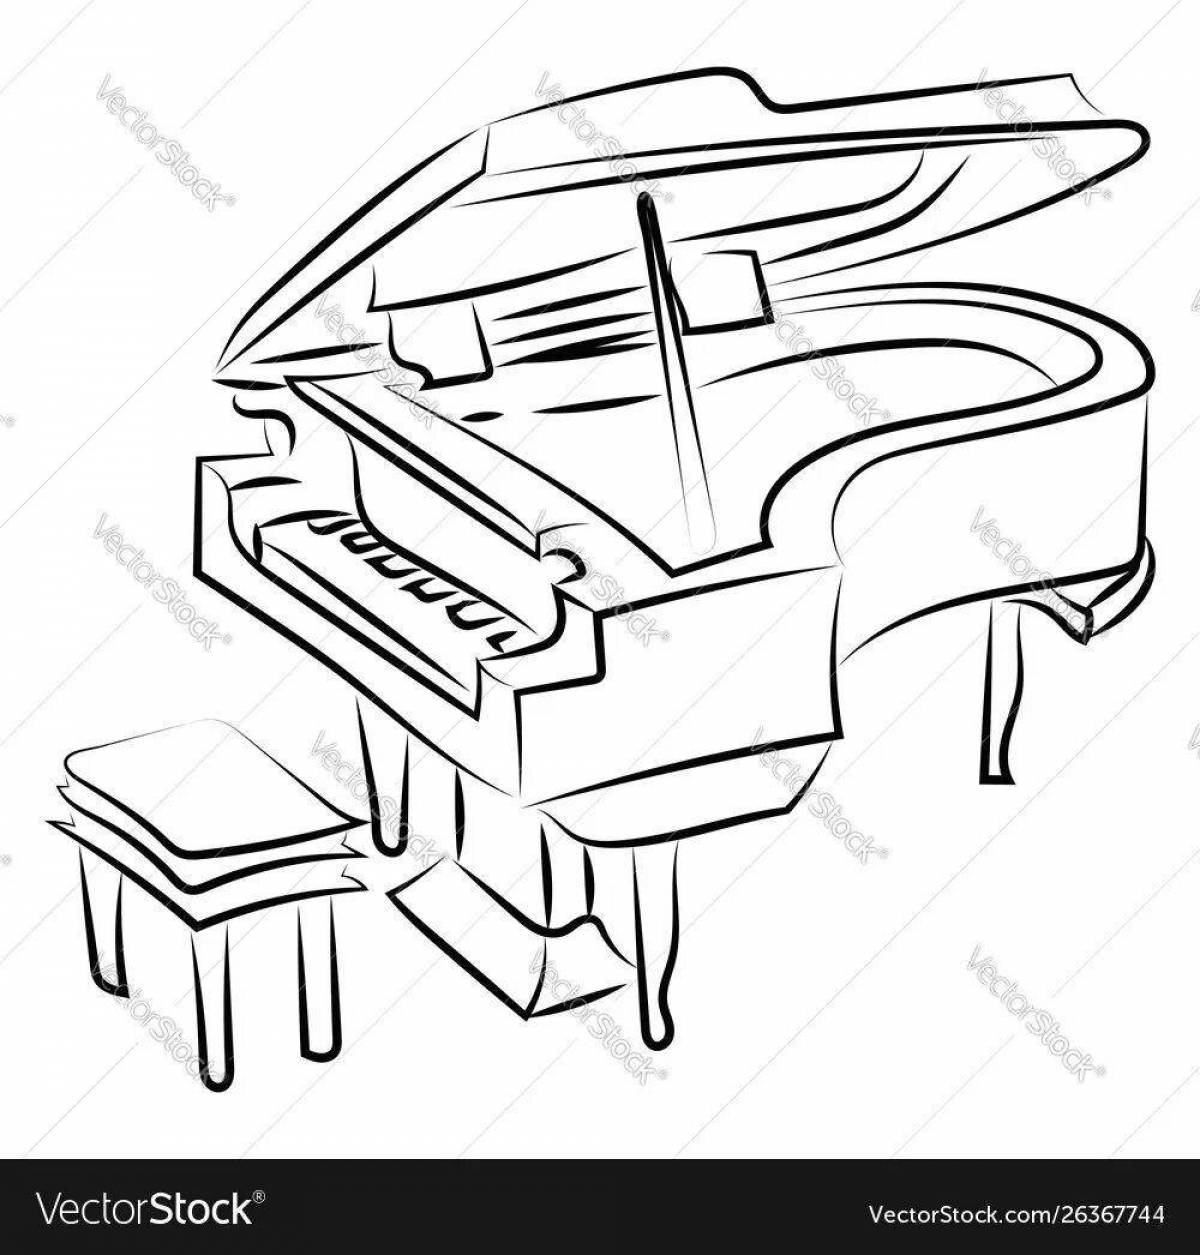 Creative piano coloring book for kids